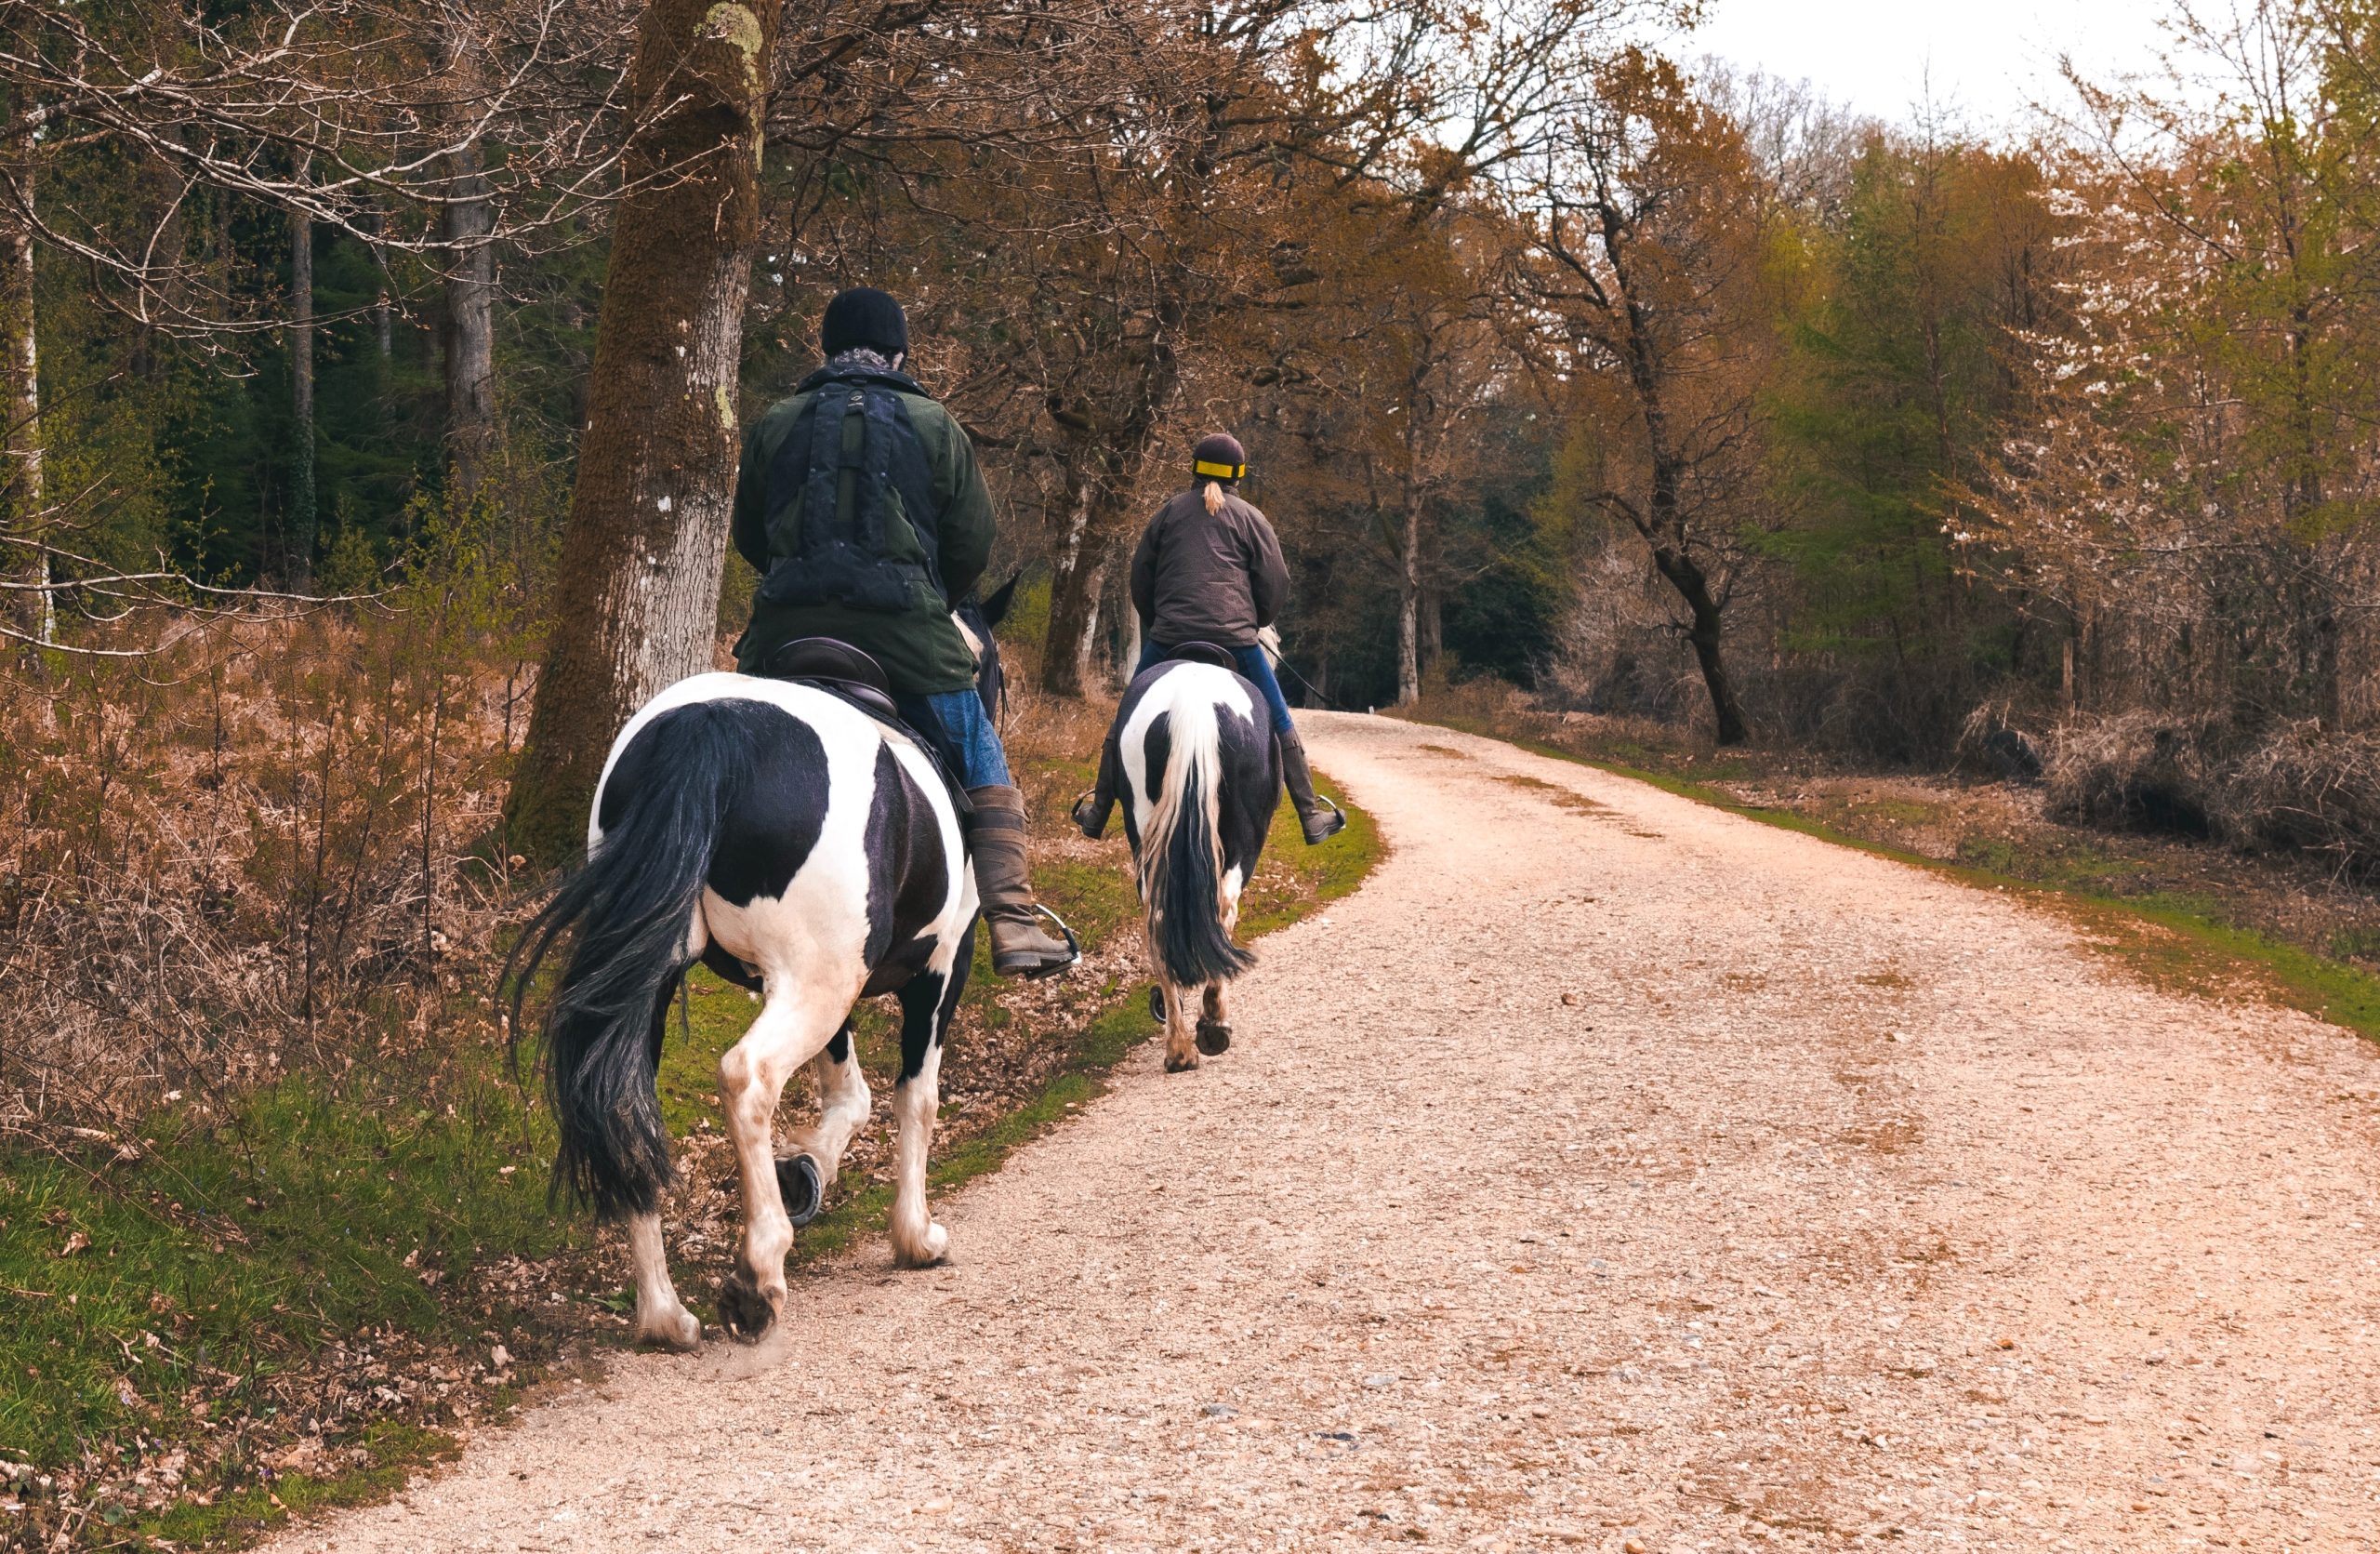 NEWS | Safety of horse riders on the agenda in West Mercia after changes to the Highway Code